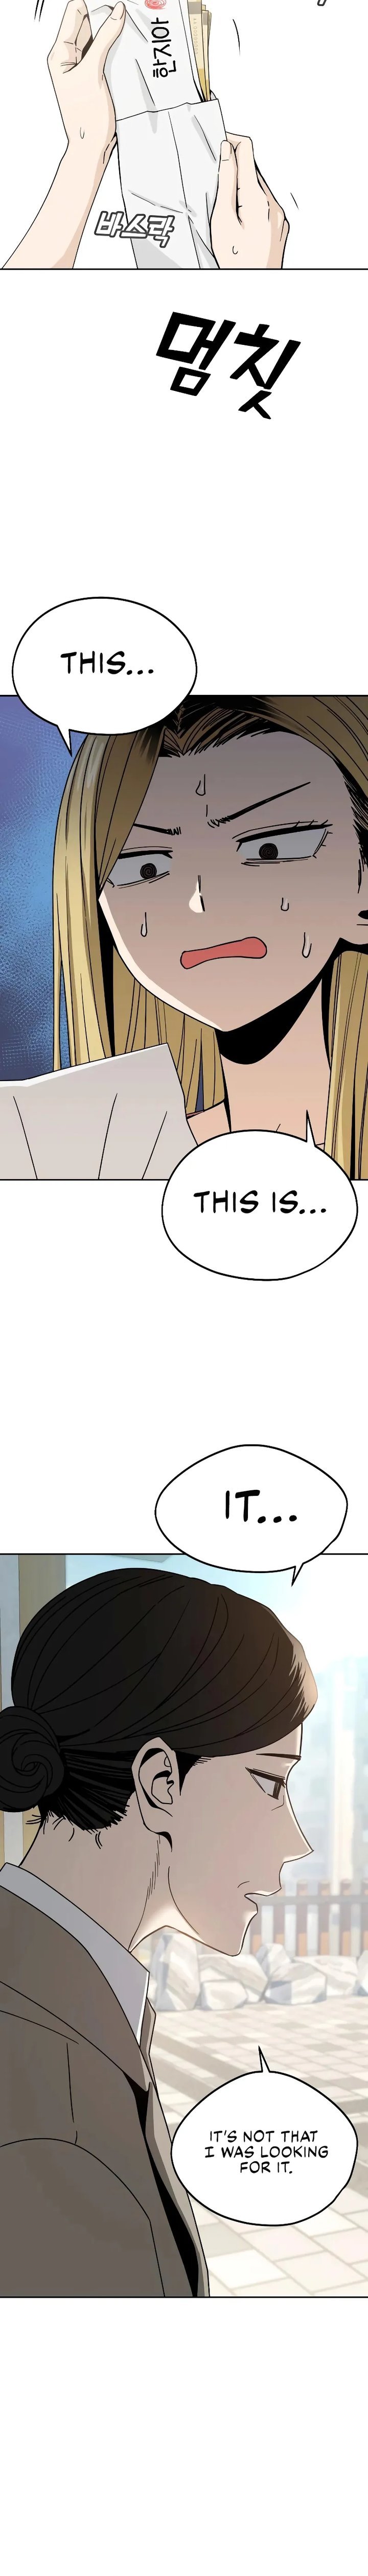 Match Made In Heaven By Chance Chapter 55 Page 6